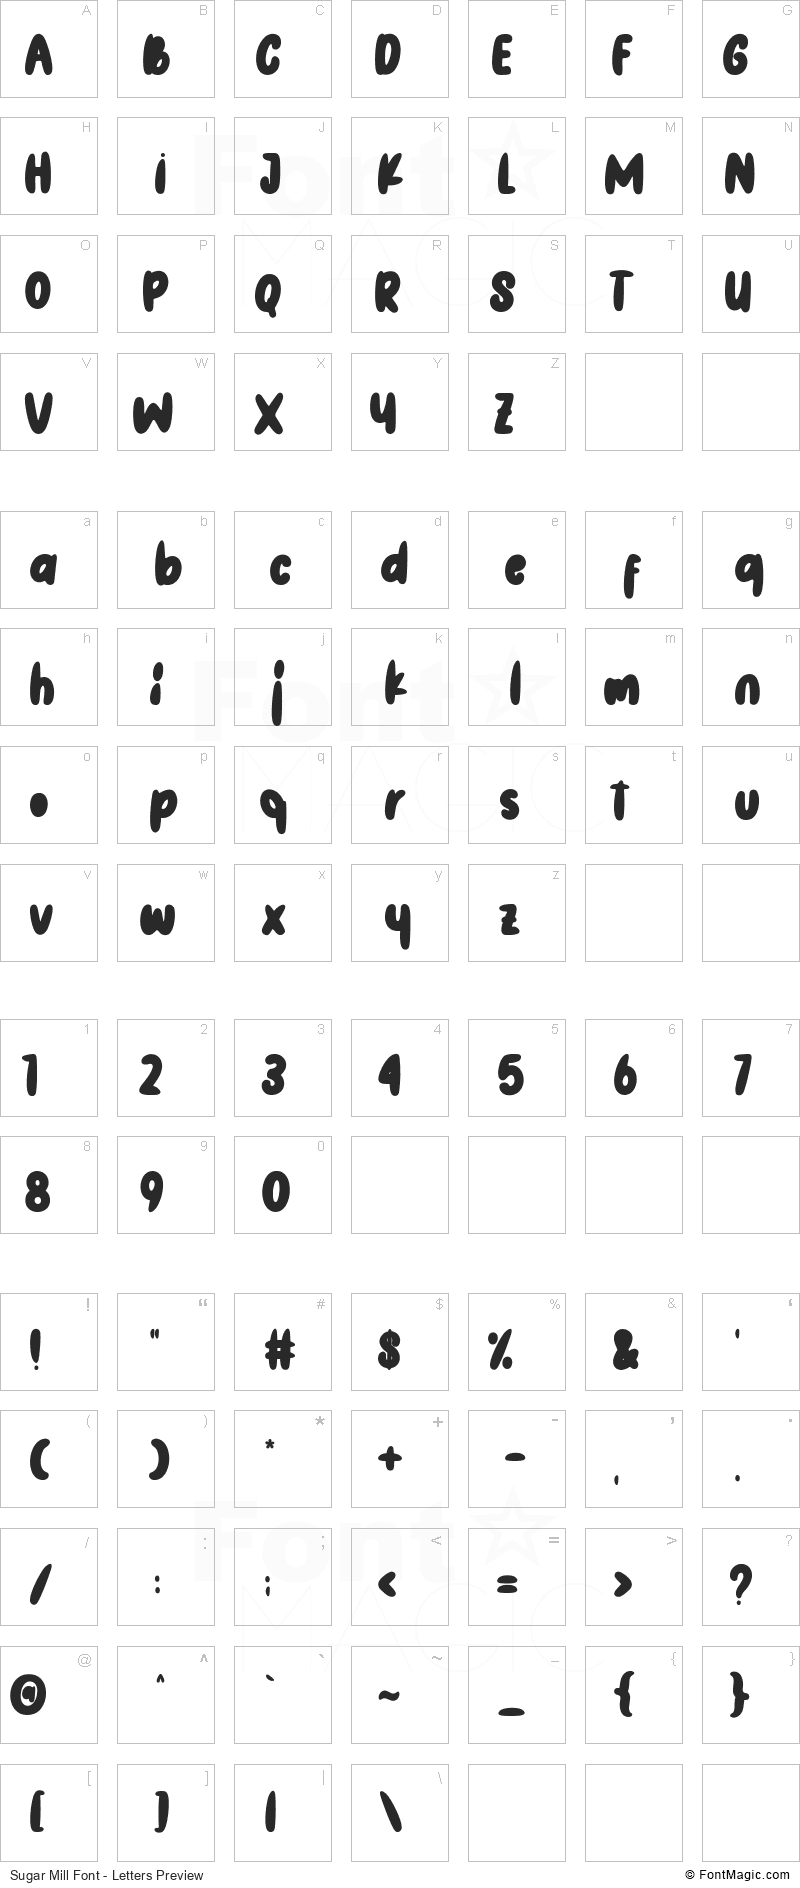 Sugar Mill Font - All Latters Preview Chart